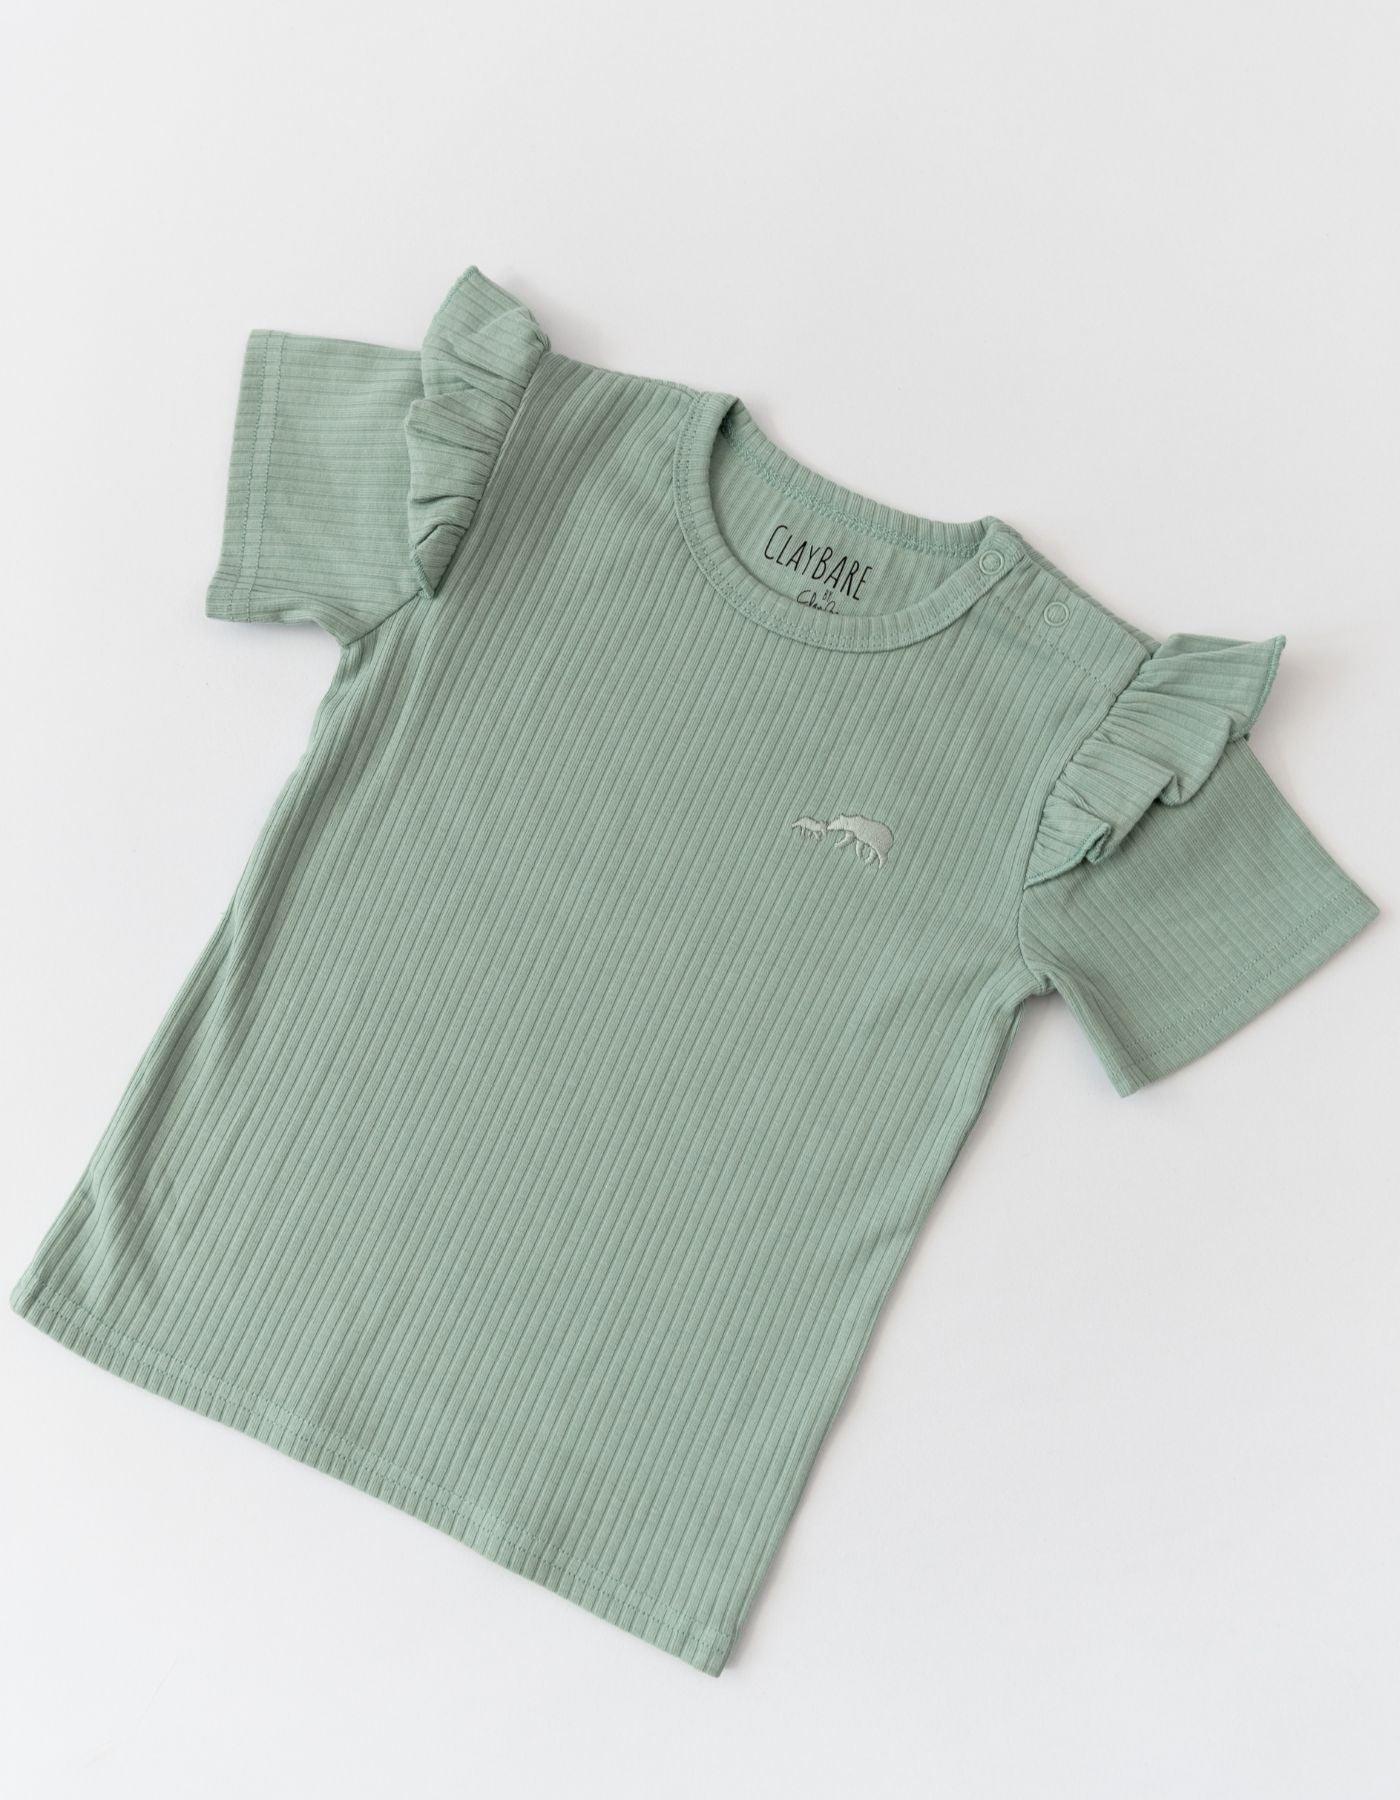 files/mint-frill-ribbed-short-sleeve-top-claybearofficial-1.jpg